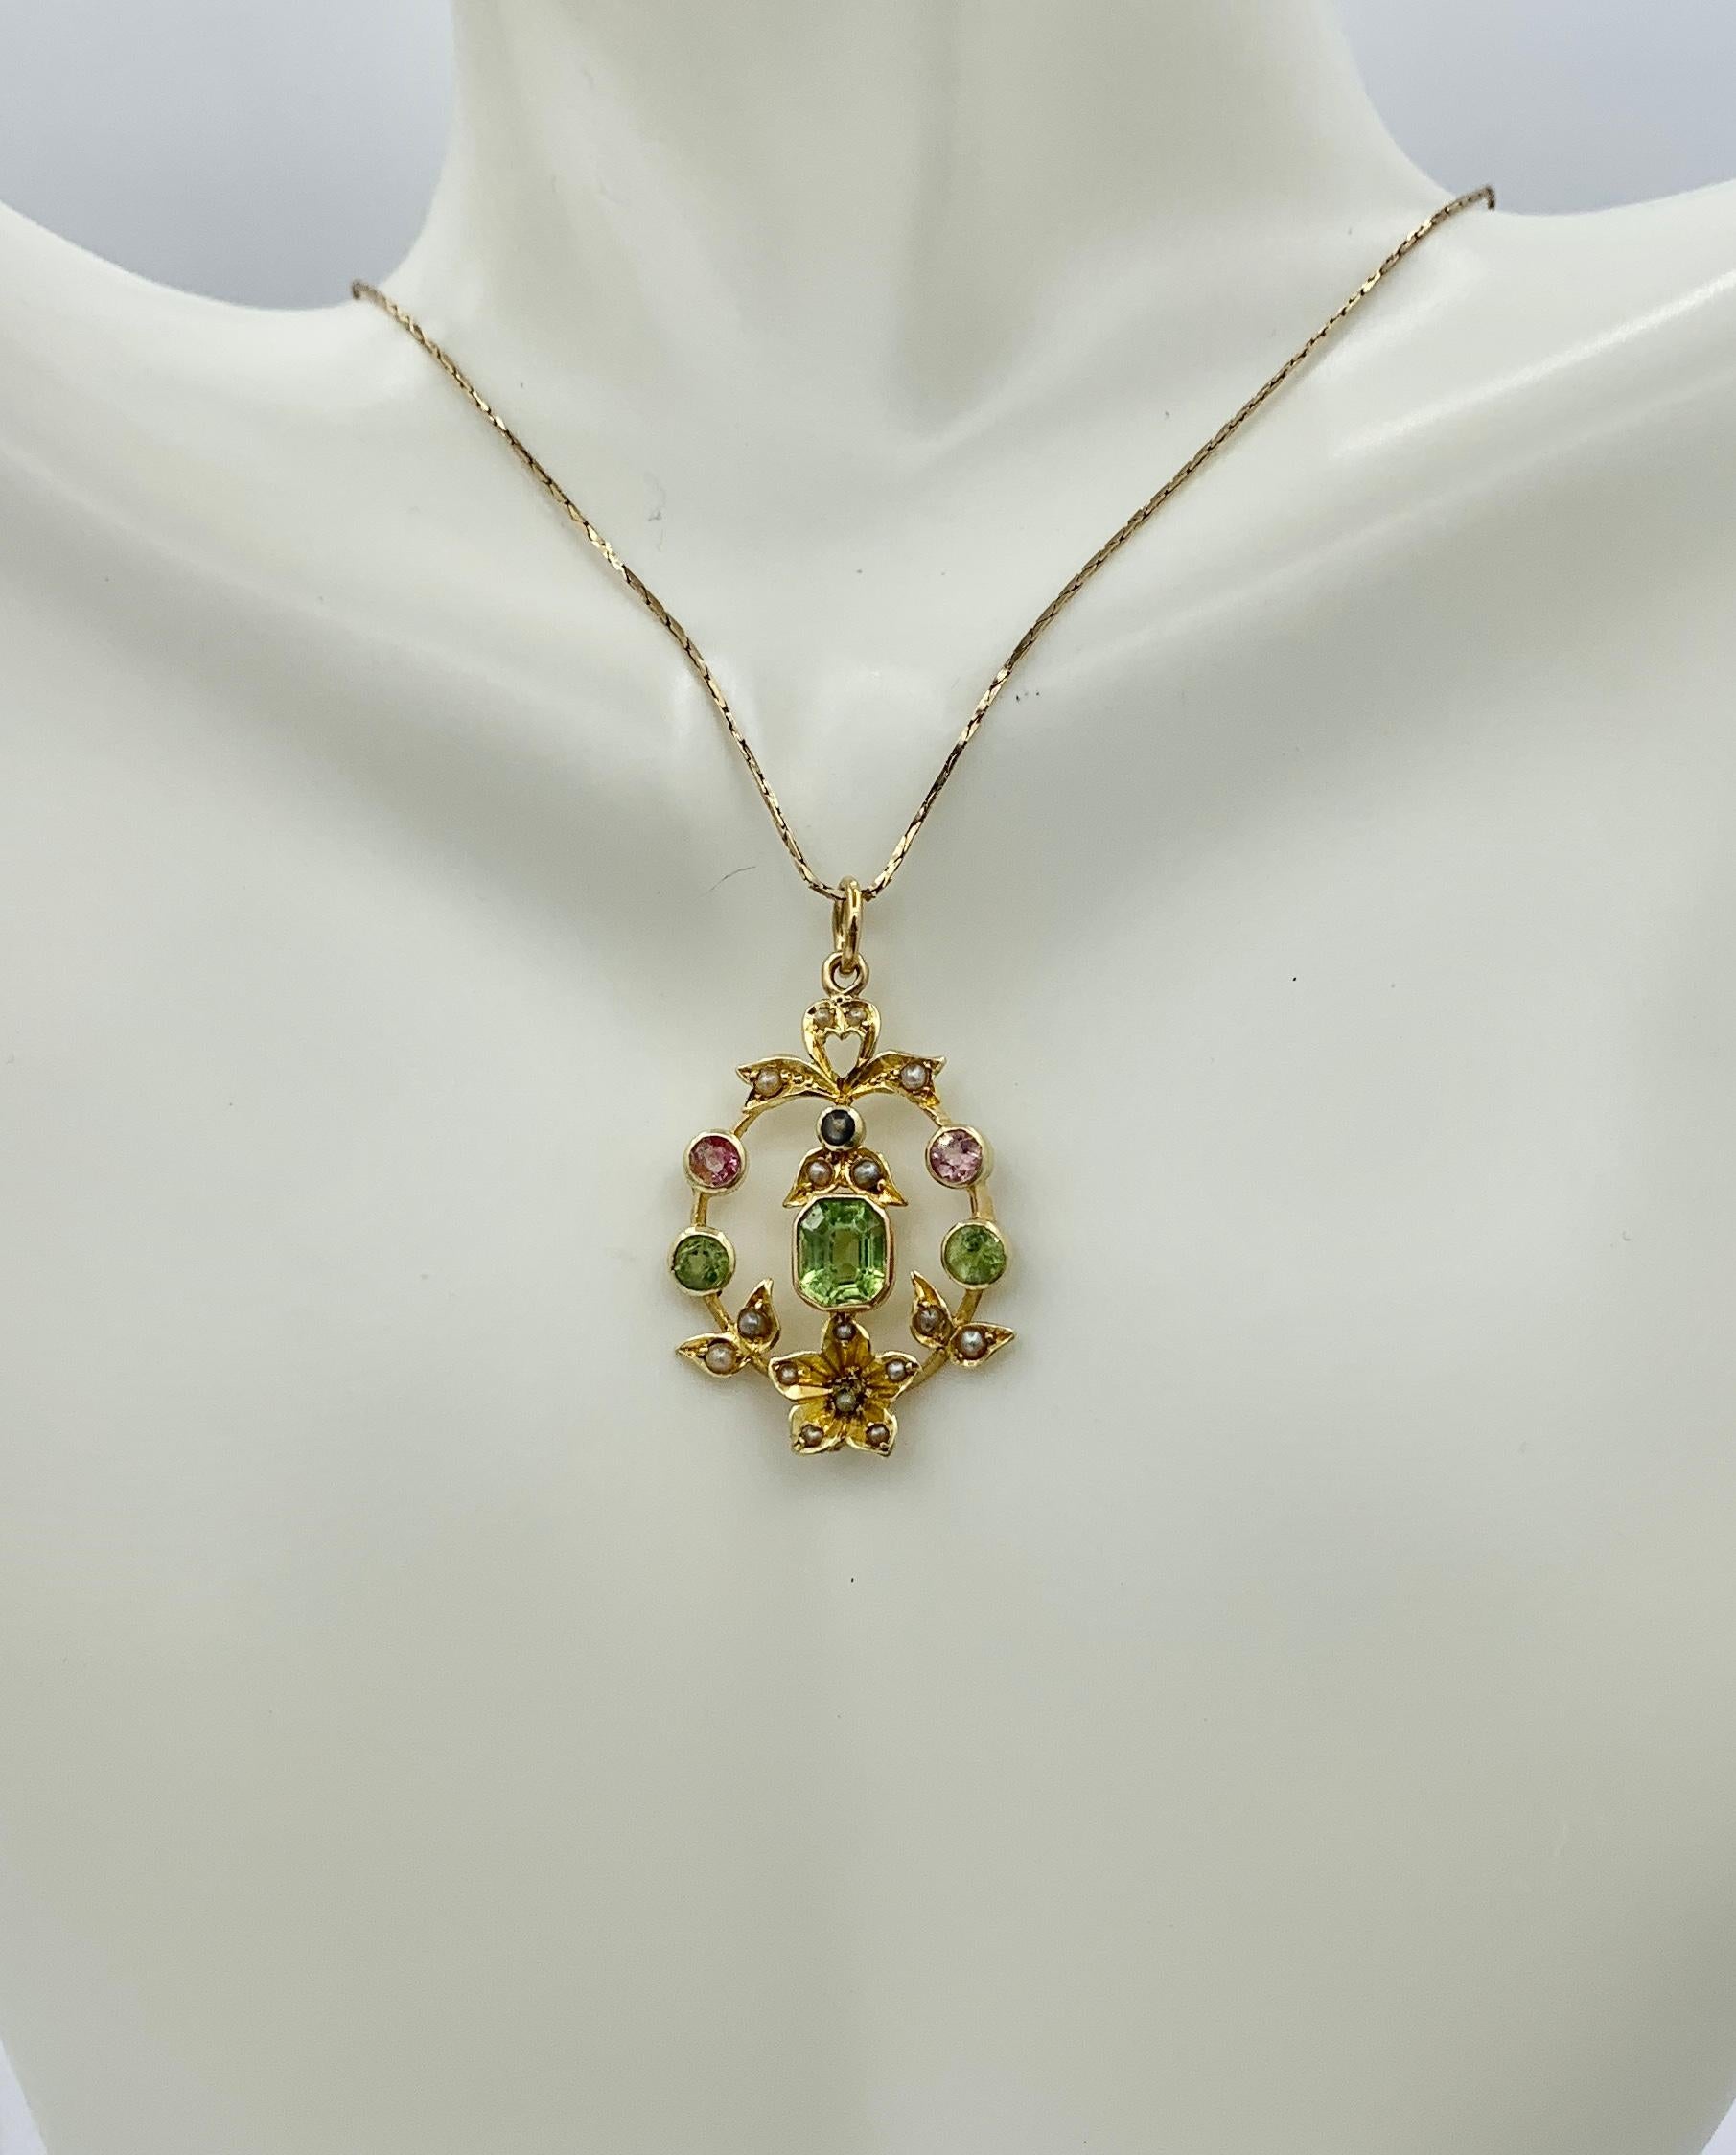 This is a stunning antique Edwardian - Art Deco Peridot and Pink Tourmaline and Pearl Lavaliere Pendant Necklace in 15 Karat Gold.  The gorgeous and full of symbolism jewel has a heart, a forget-me-not flower and a bow motif and the pendant wears